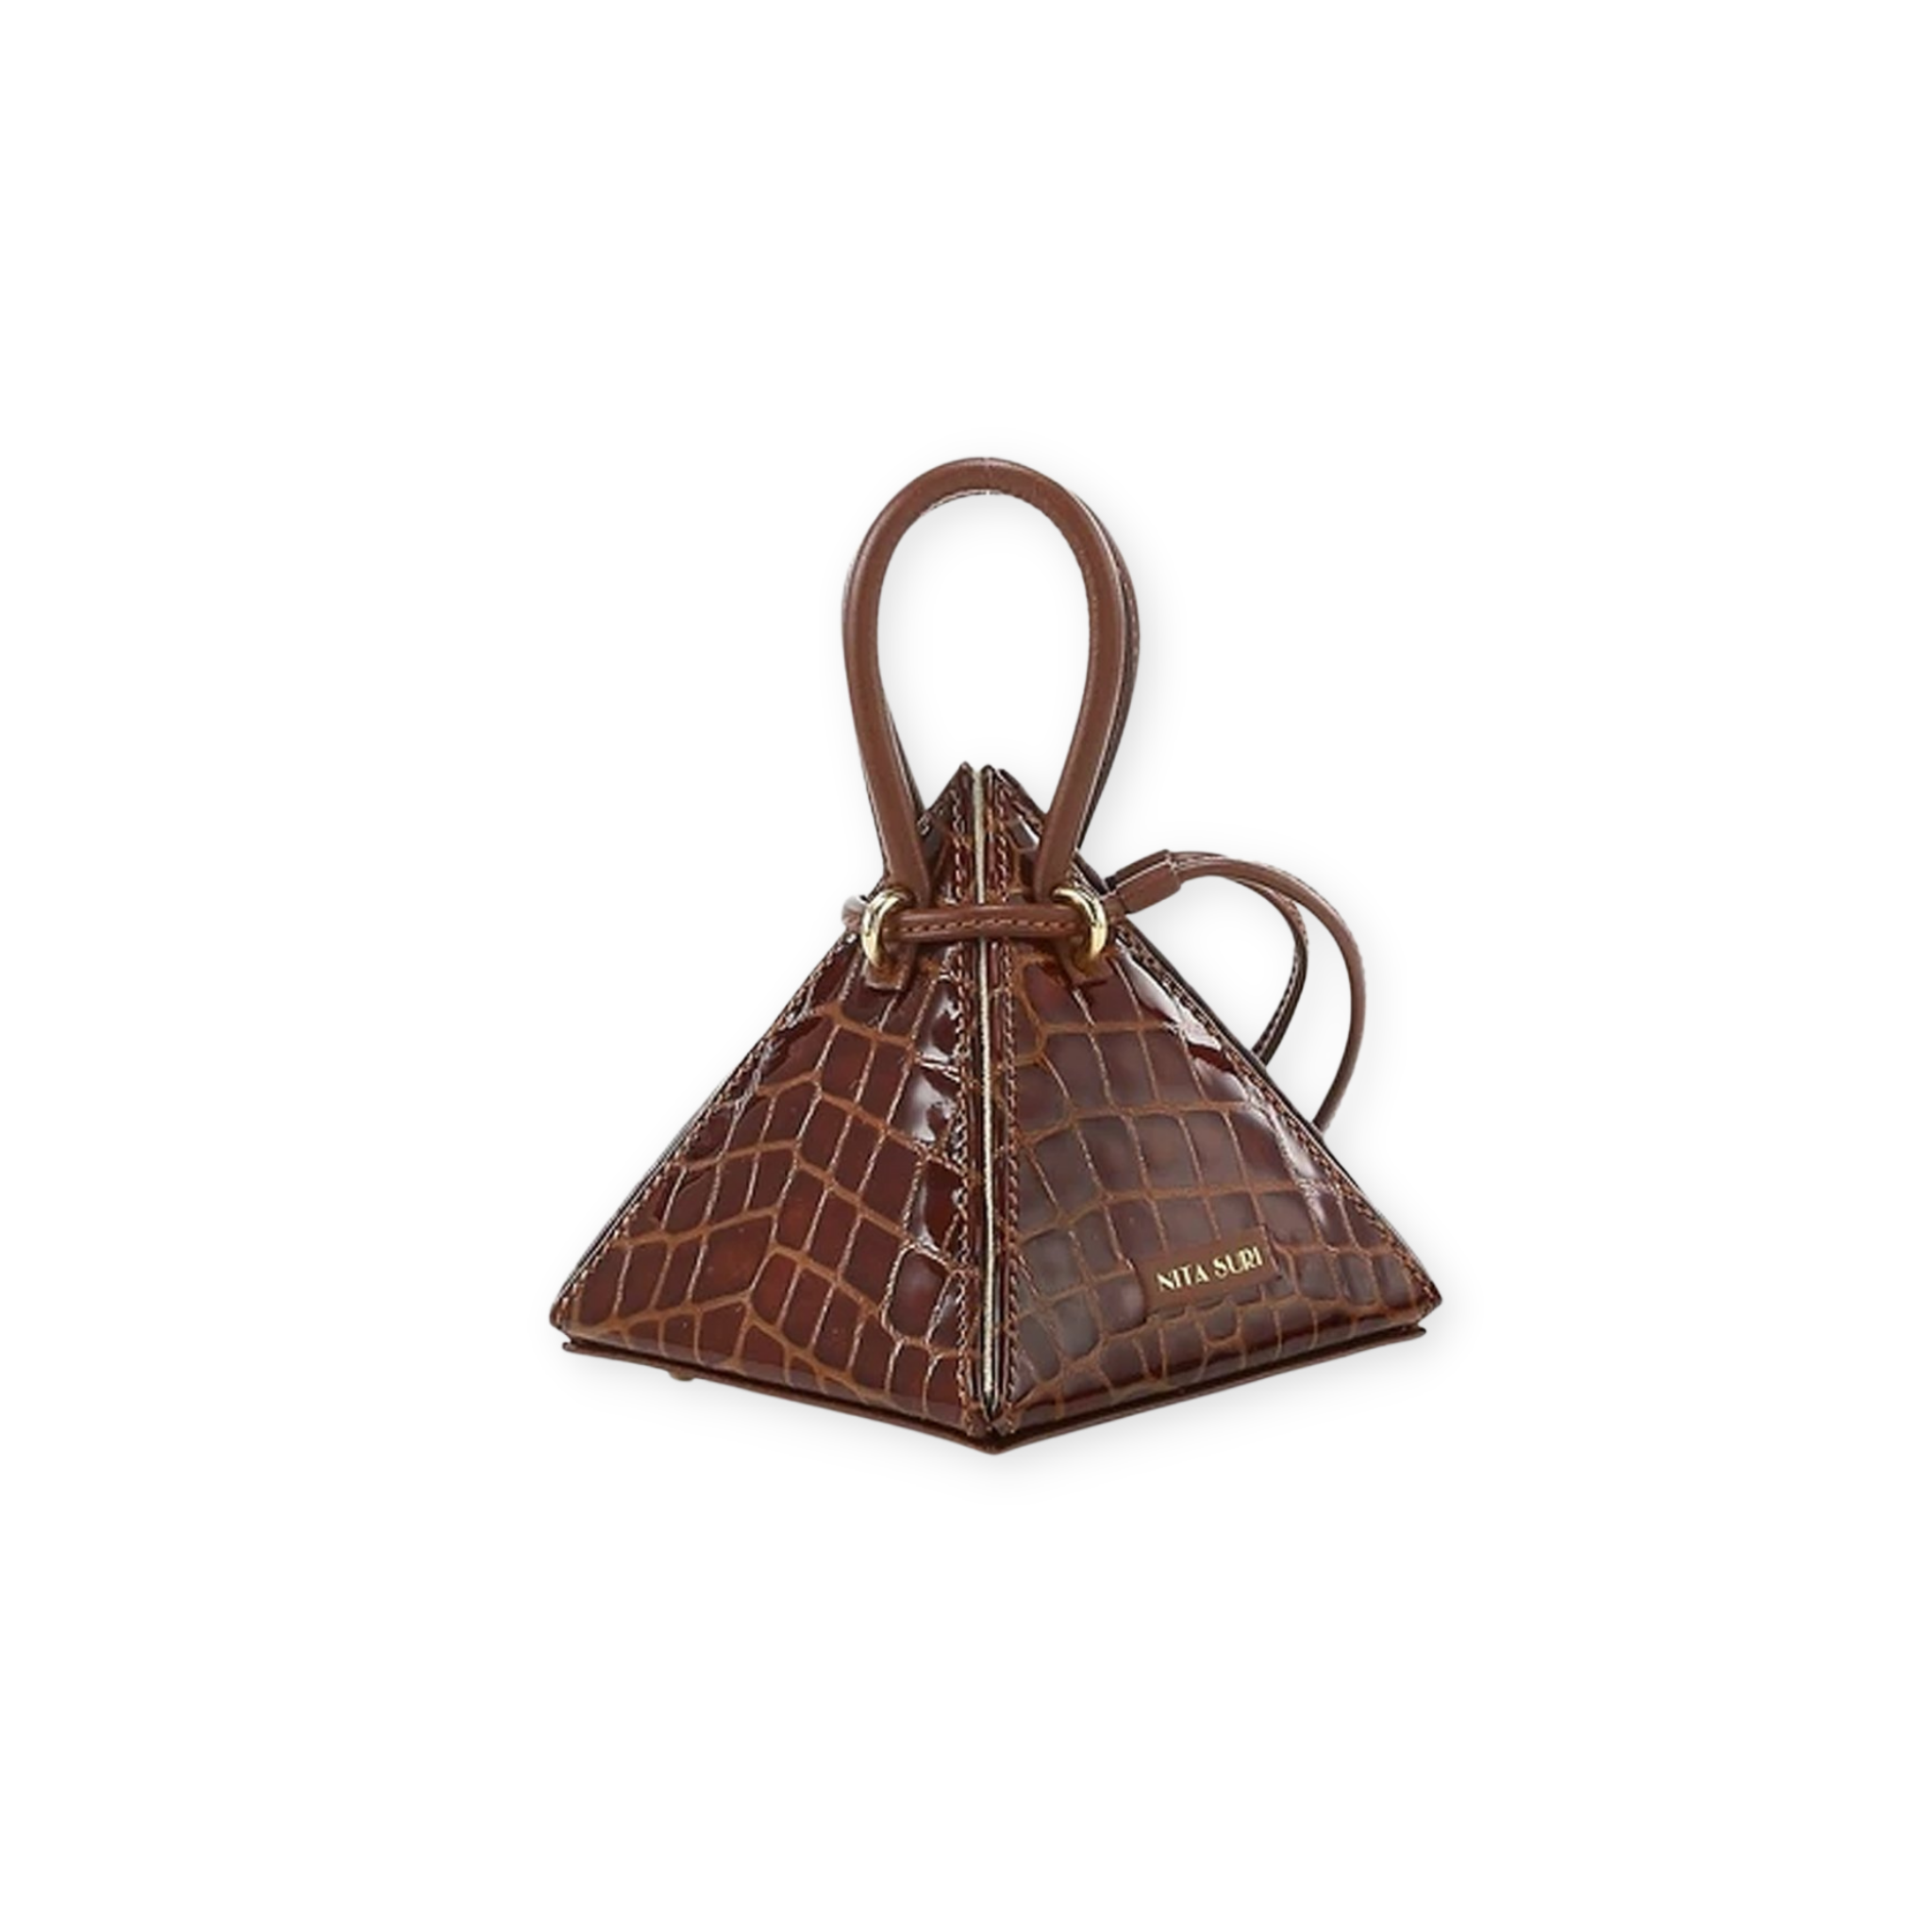 Buy now the Exotic LIA Mini bag inspired by the geometric shapes of our designer's birth city Barcelona, and its world known artist, Antonio Gaudí, architect of the world wonder La Sagrada Familia. The Lia Croc-Embossed Cuero Brown Exotic Mini bag has a unique and functional pyramidal design able to fit all your essentials. 